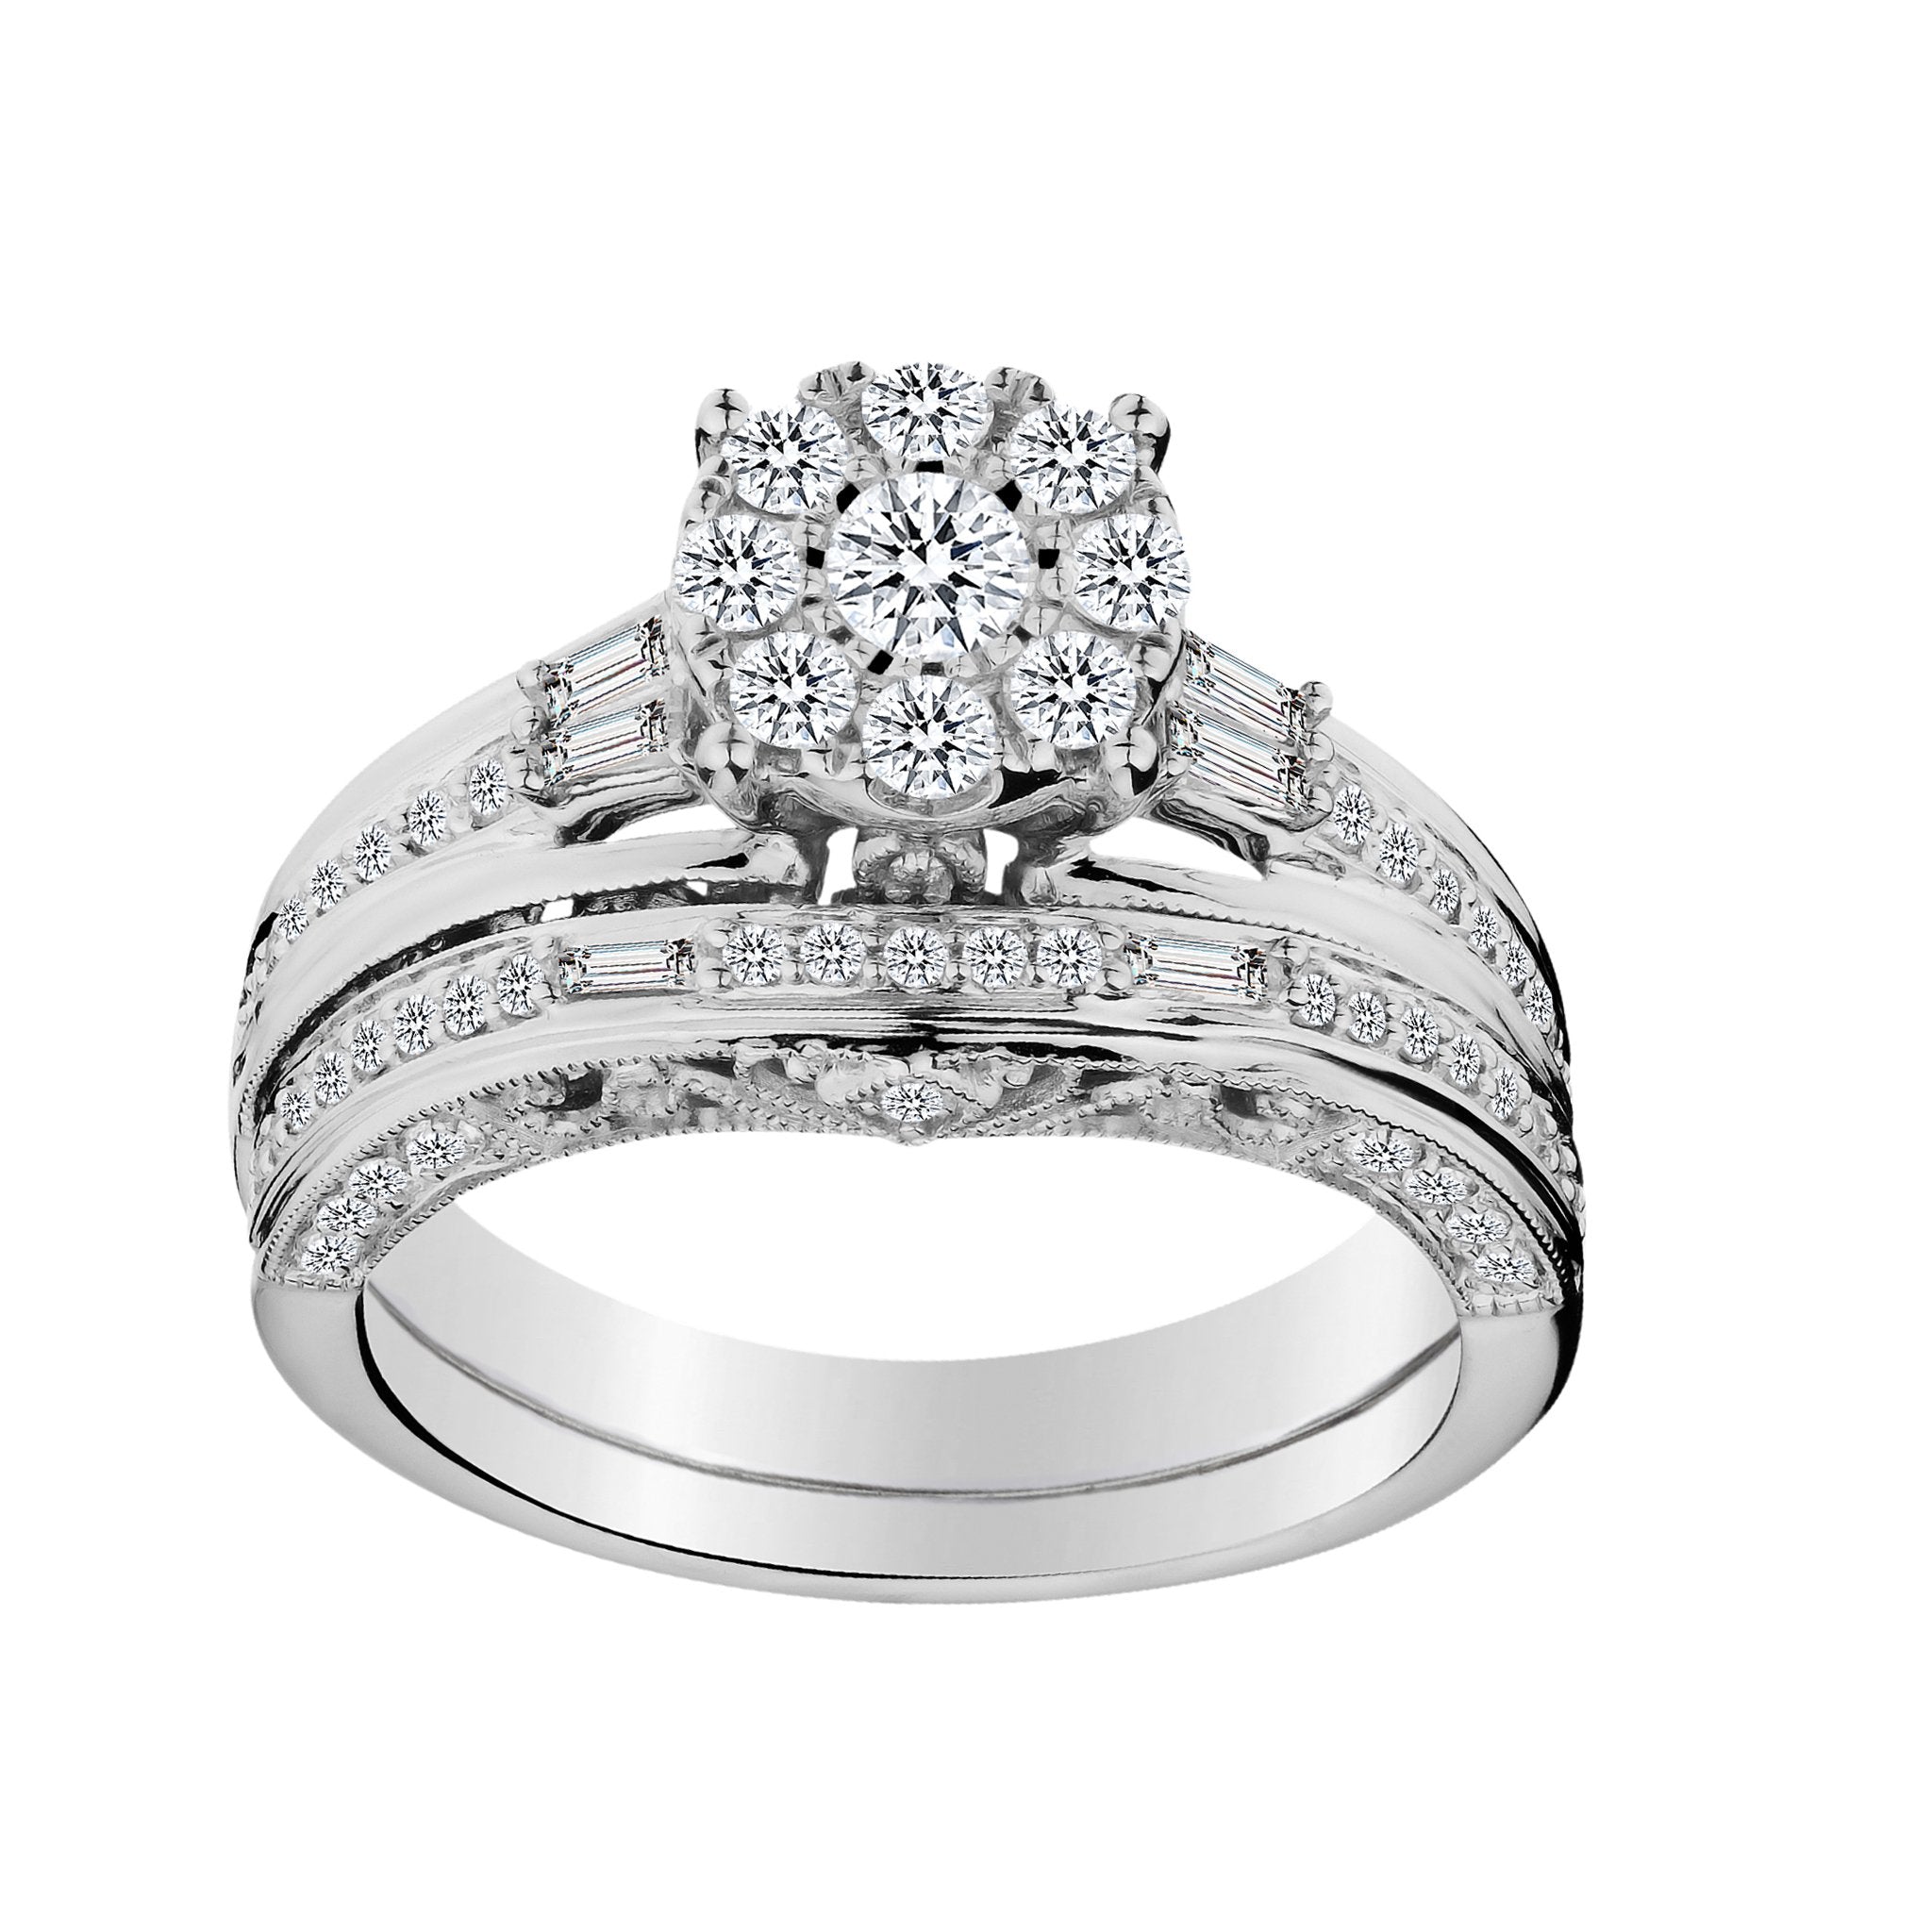 1.00 CARAT DIAMOND RING SET, 10kt WHITE GOLD.......................NOW - Griffin Jewellery Designs